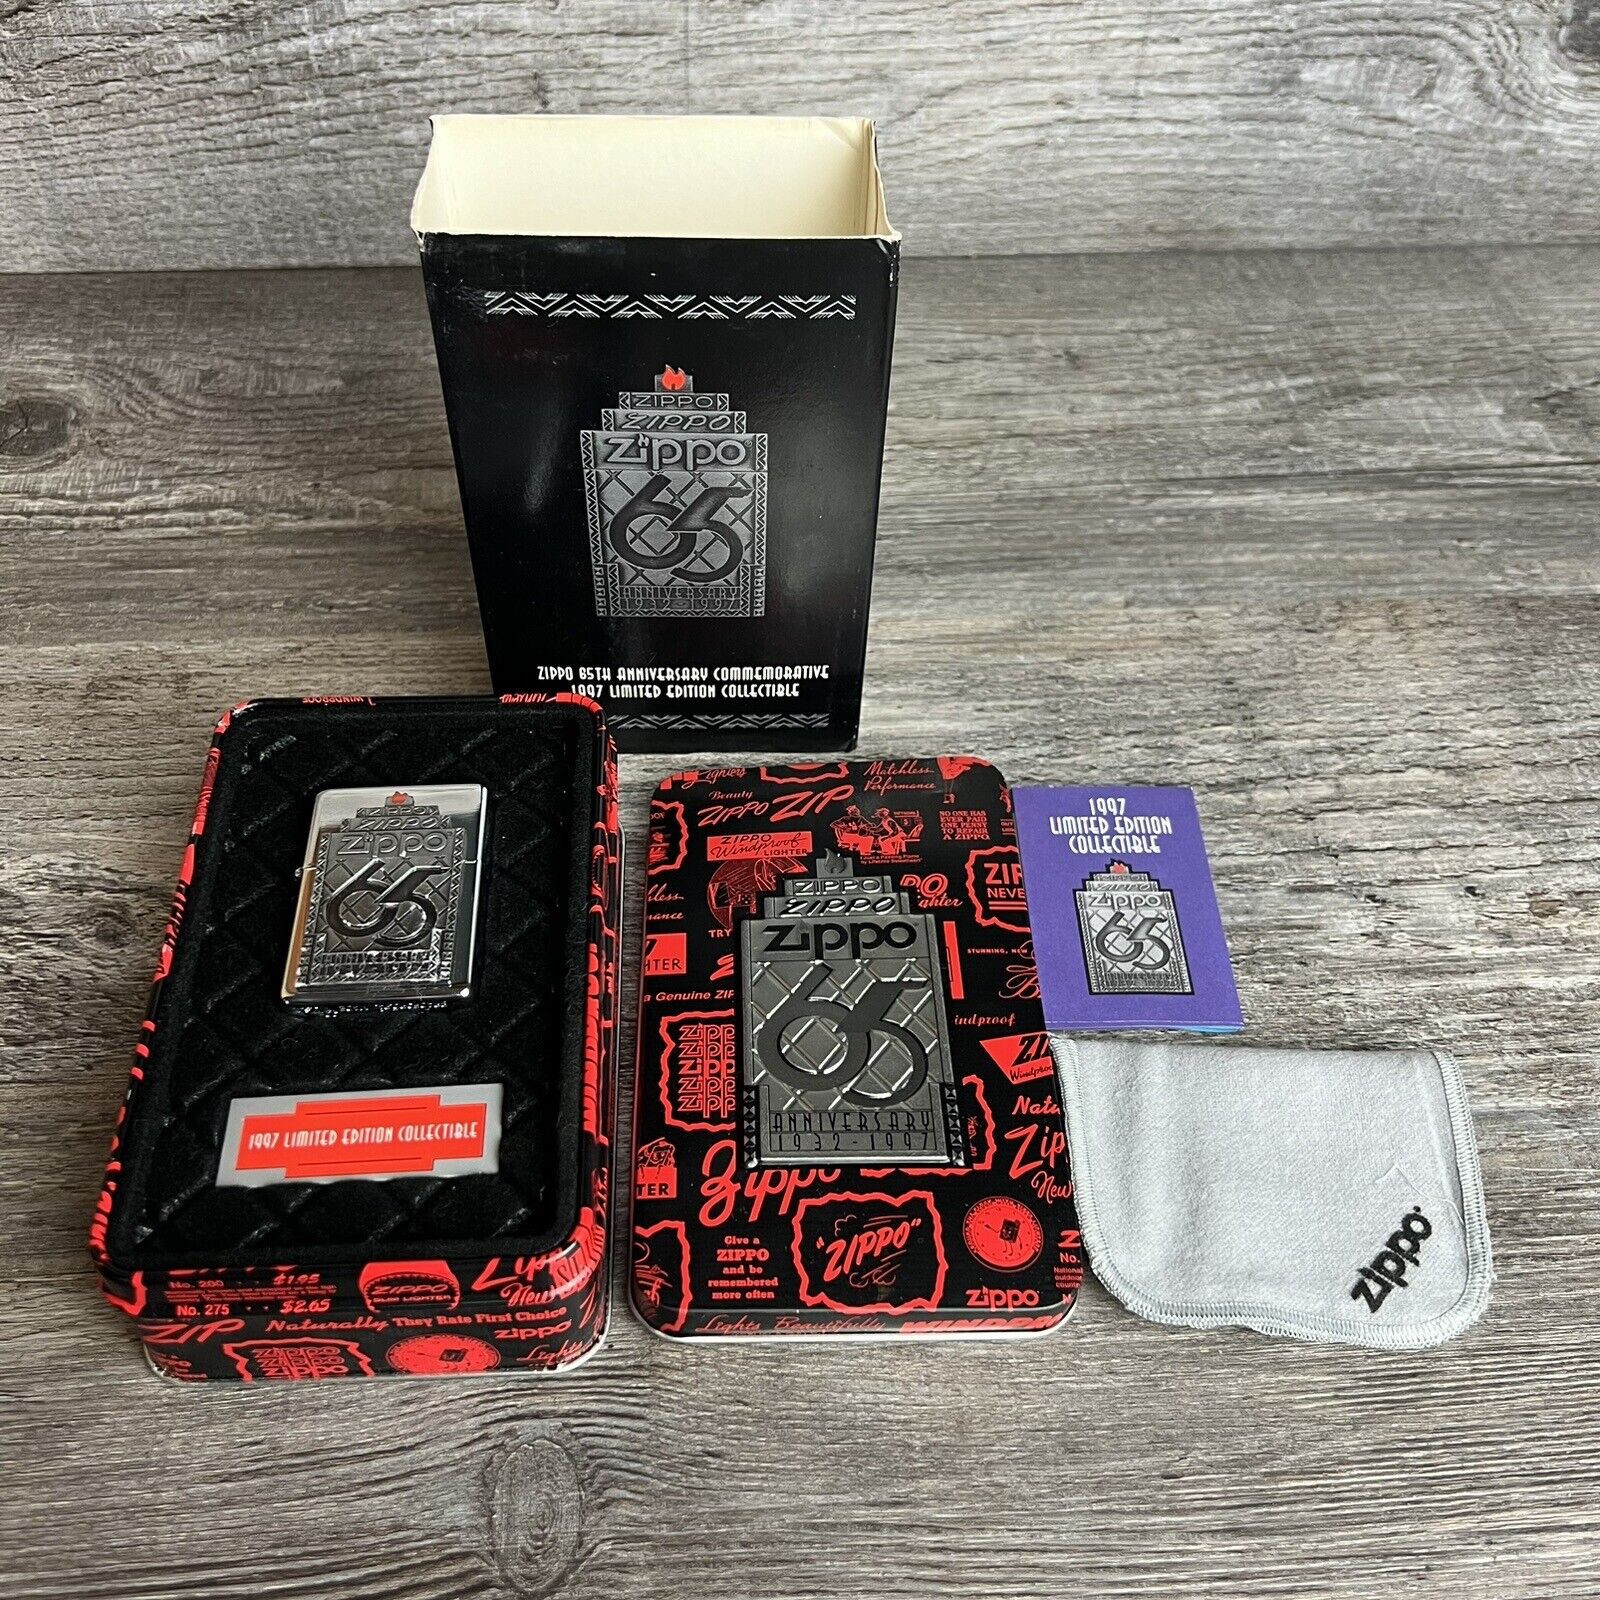 1997 ZIPPO 65th Anniversary Limited Edition Lighter In Case NEW